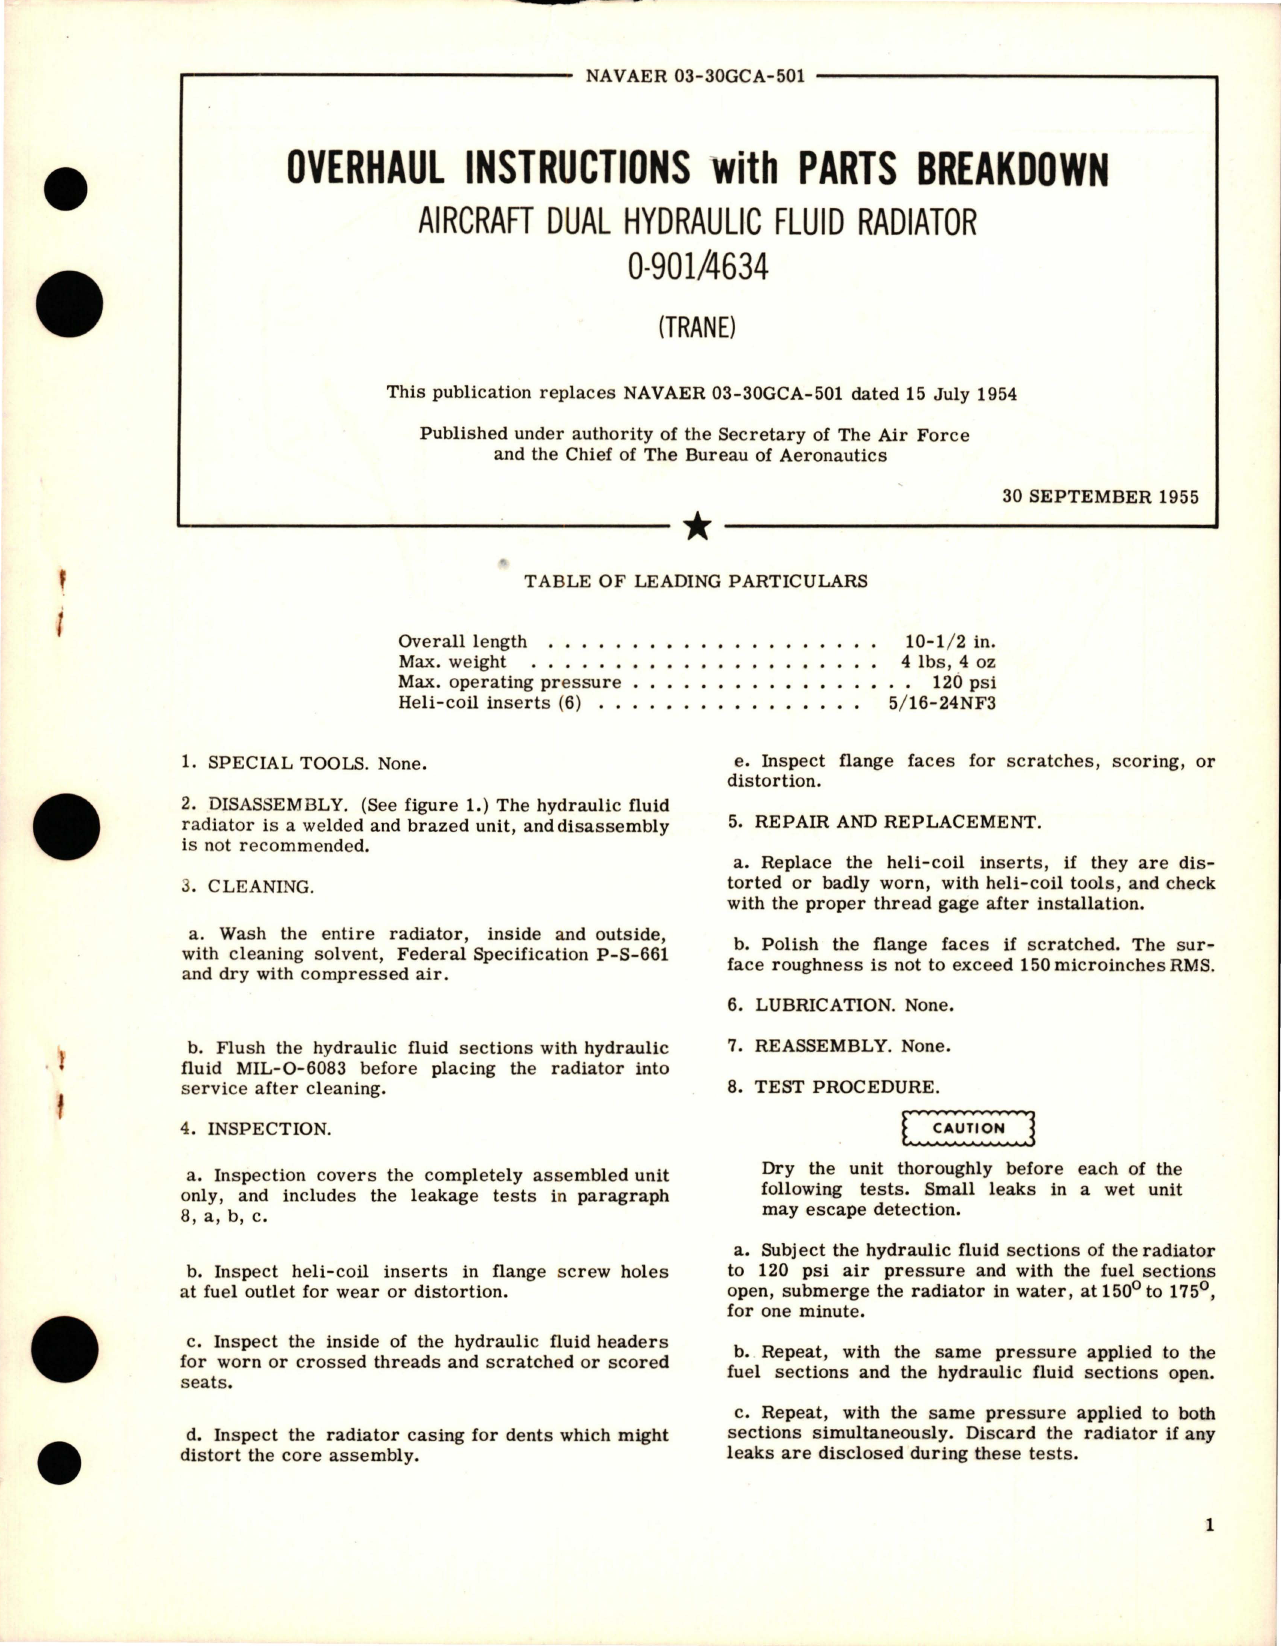 Sample page 1 from AirCorps Library document: Overhaul Instructions with Parts Breakdown for Dual Hydraulic Fluid Radiator - 0-901/4634